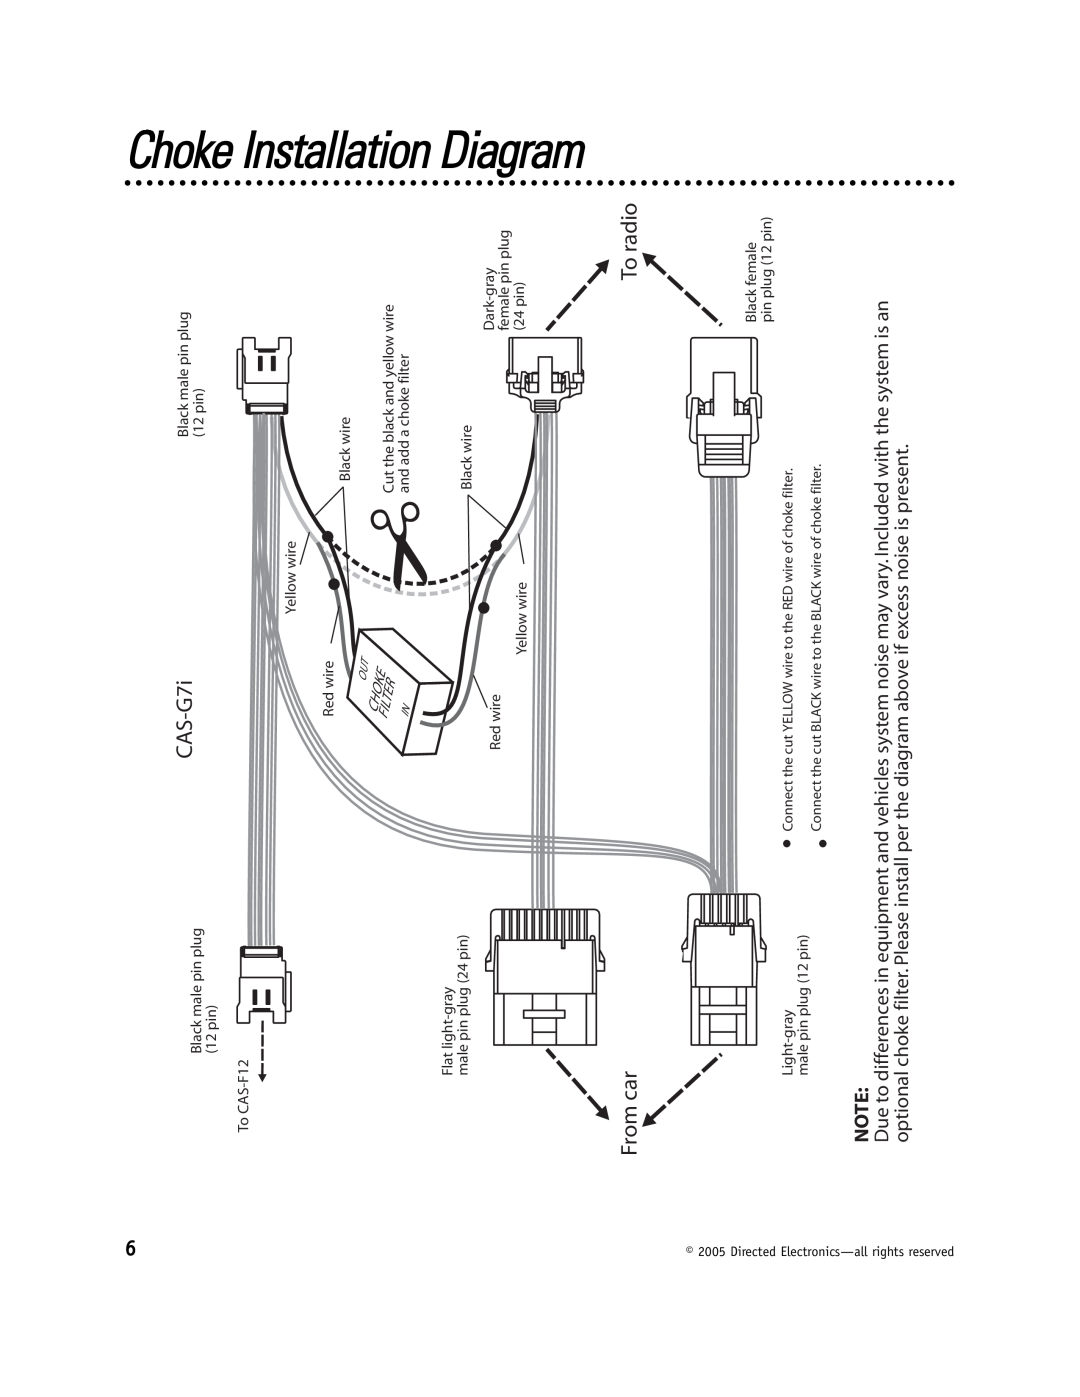 Directed Video GM100 manual Choke Installation Diagram, From car, CAS-G7i, To radio 